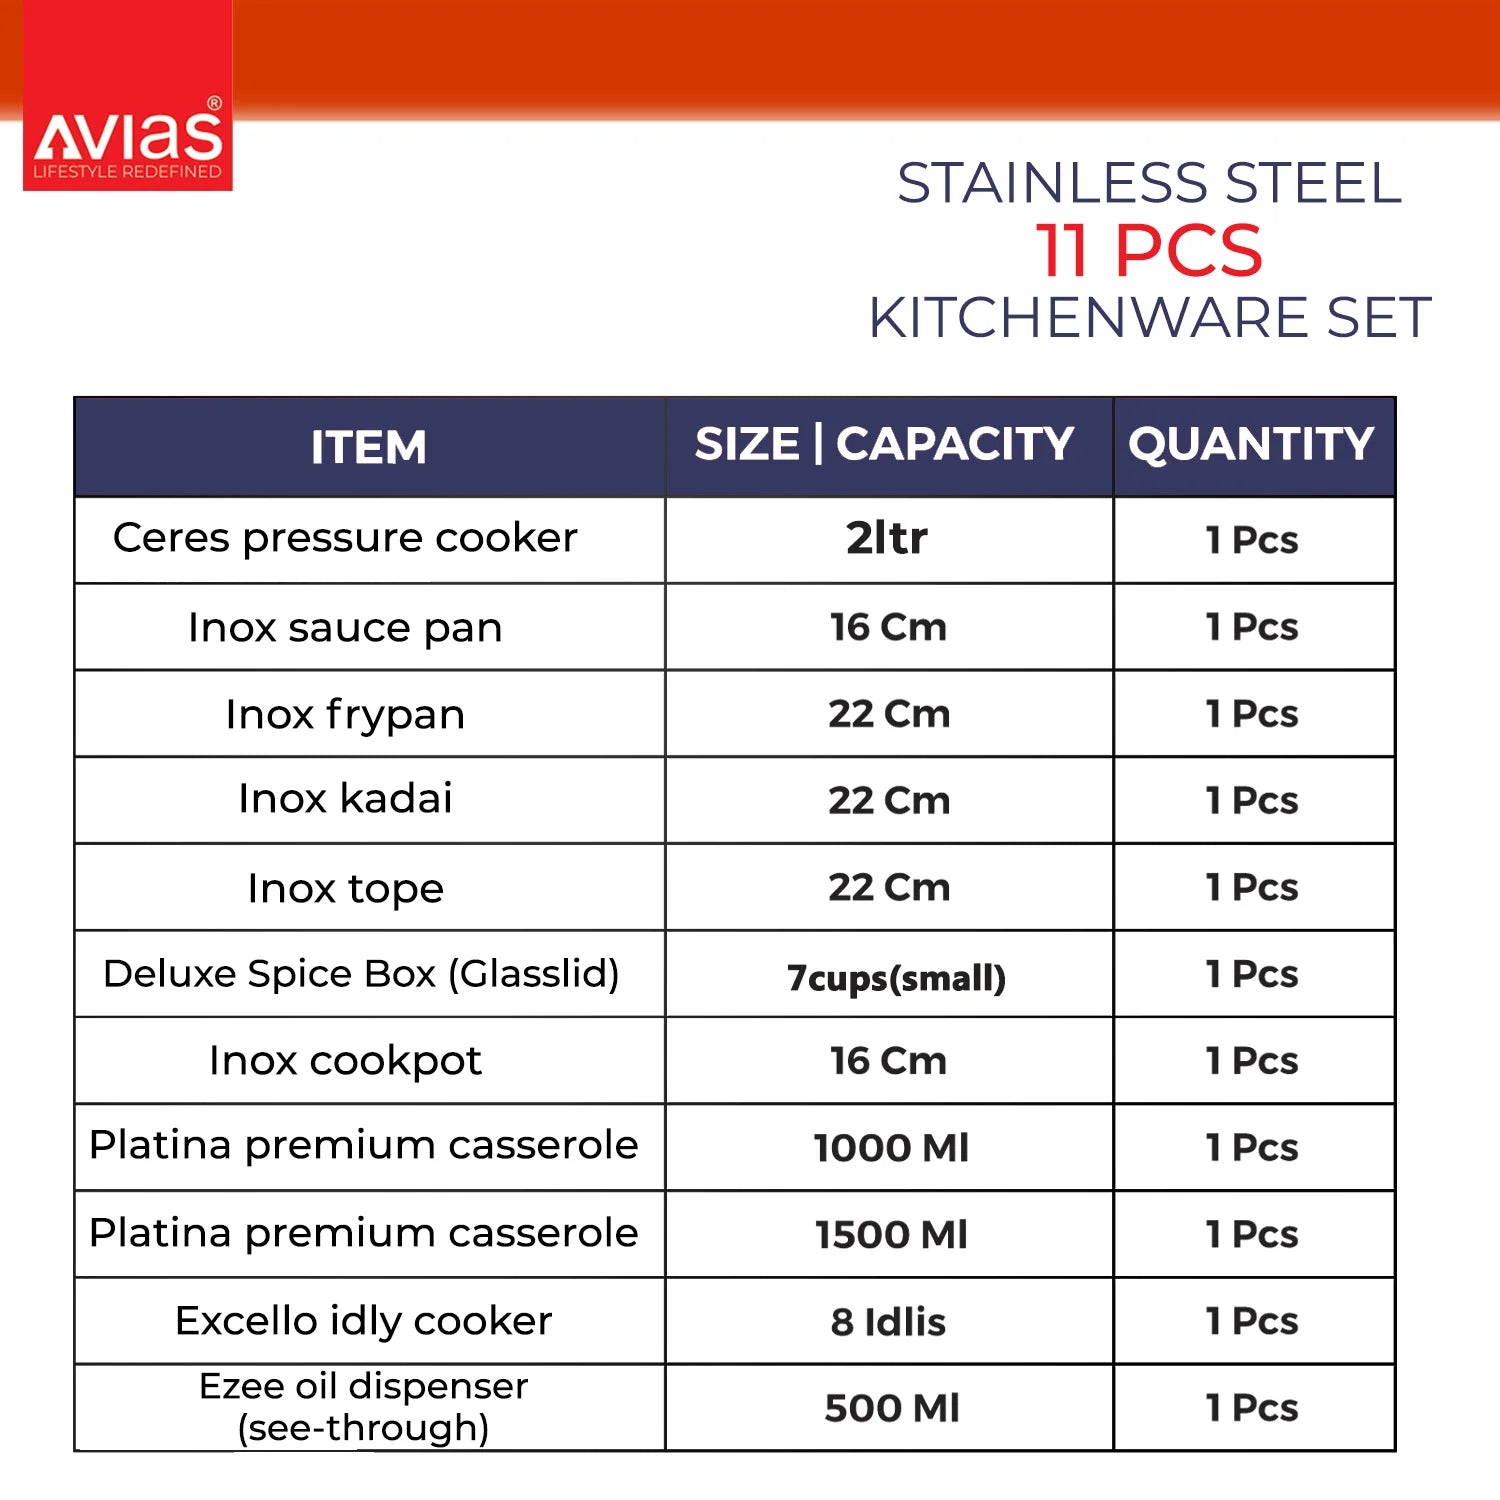 Avias Stainless Steel 11 PCS Kitchen set | Standard | High grade and Premium quality Stainless steel